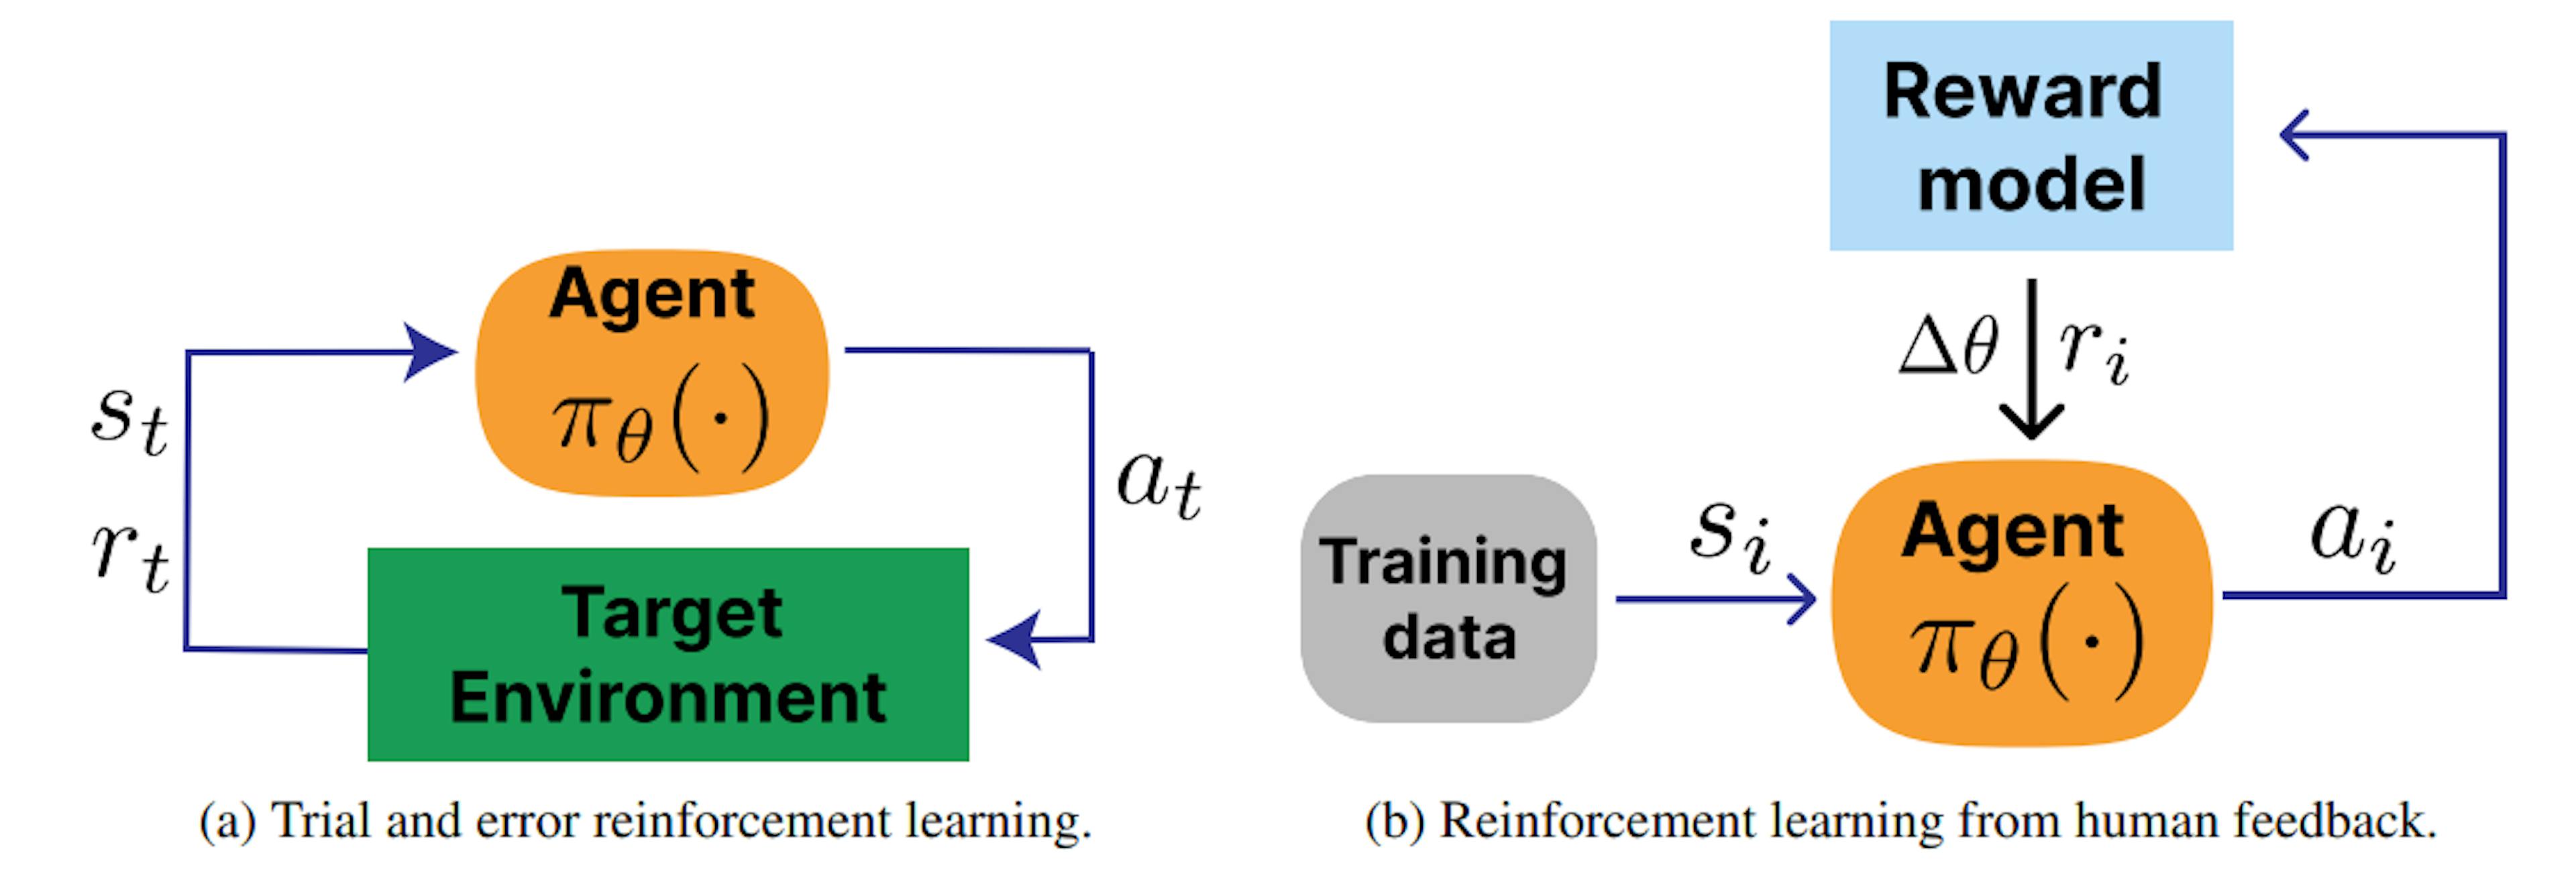 Figure 2: Comparing RLHF to a traditional RL problem. (left) is the canonical RL problem, where an agent interactsrepeatedly with an environment. (right) is RLHF, where an agent is optimized against a set of predetermined prompts